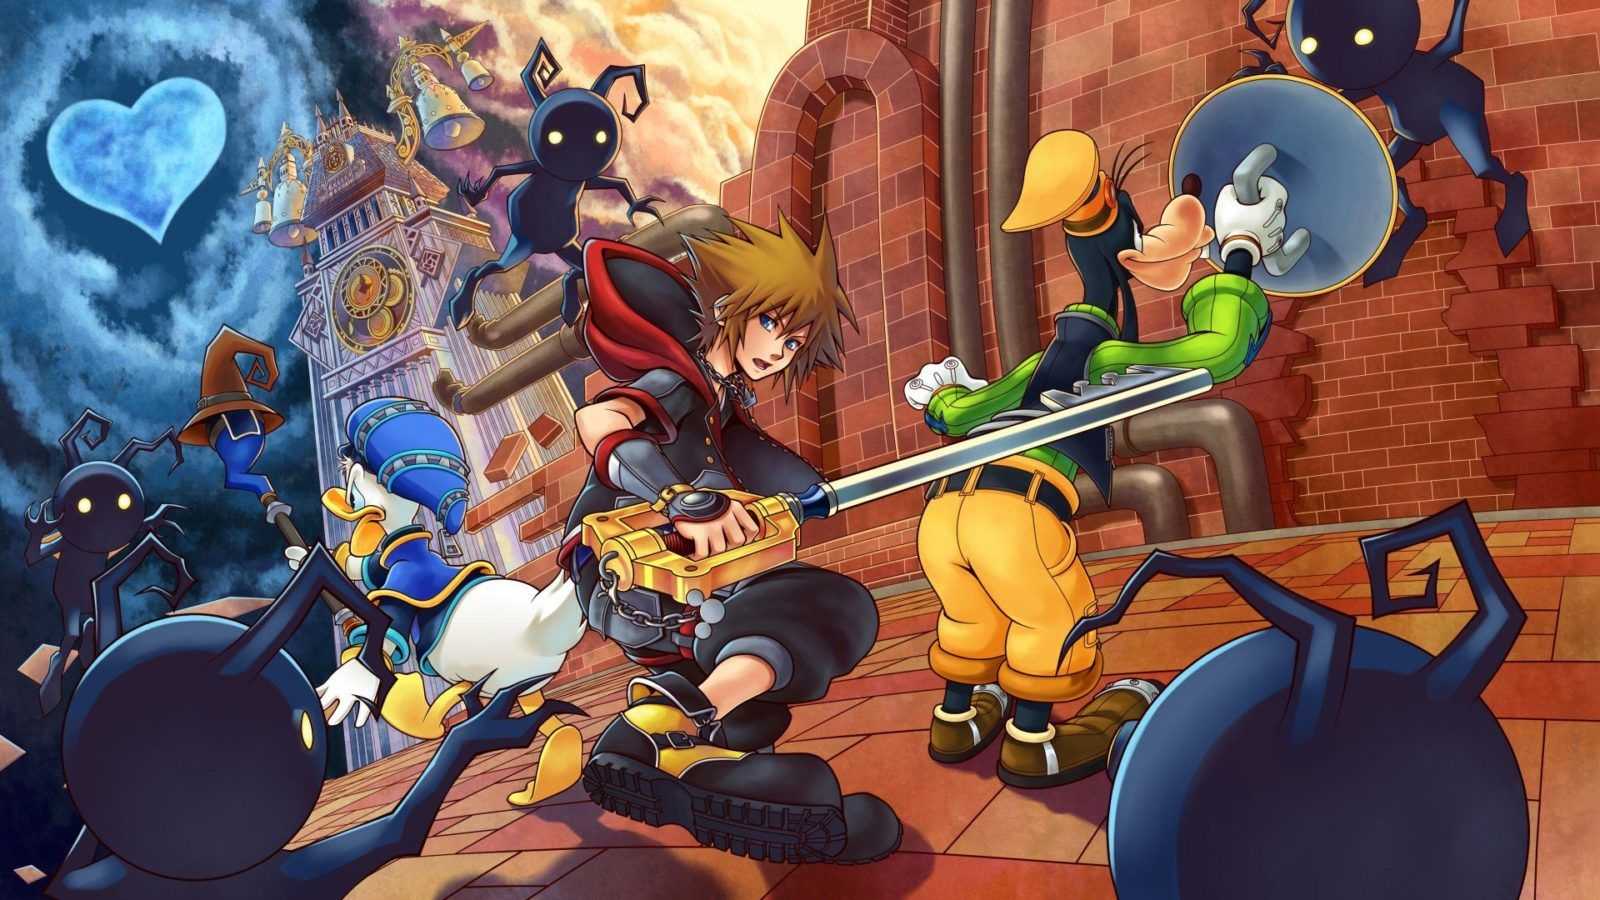 can you play any kingdom hearts with the kingdom hearts 3 deluxe edition for xbox one